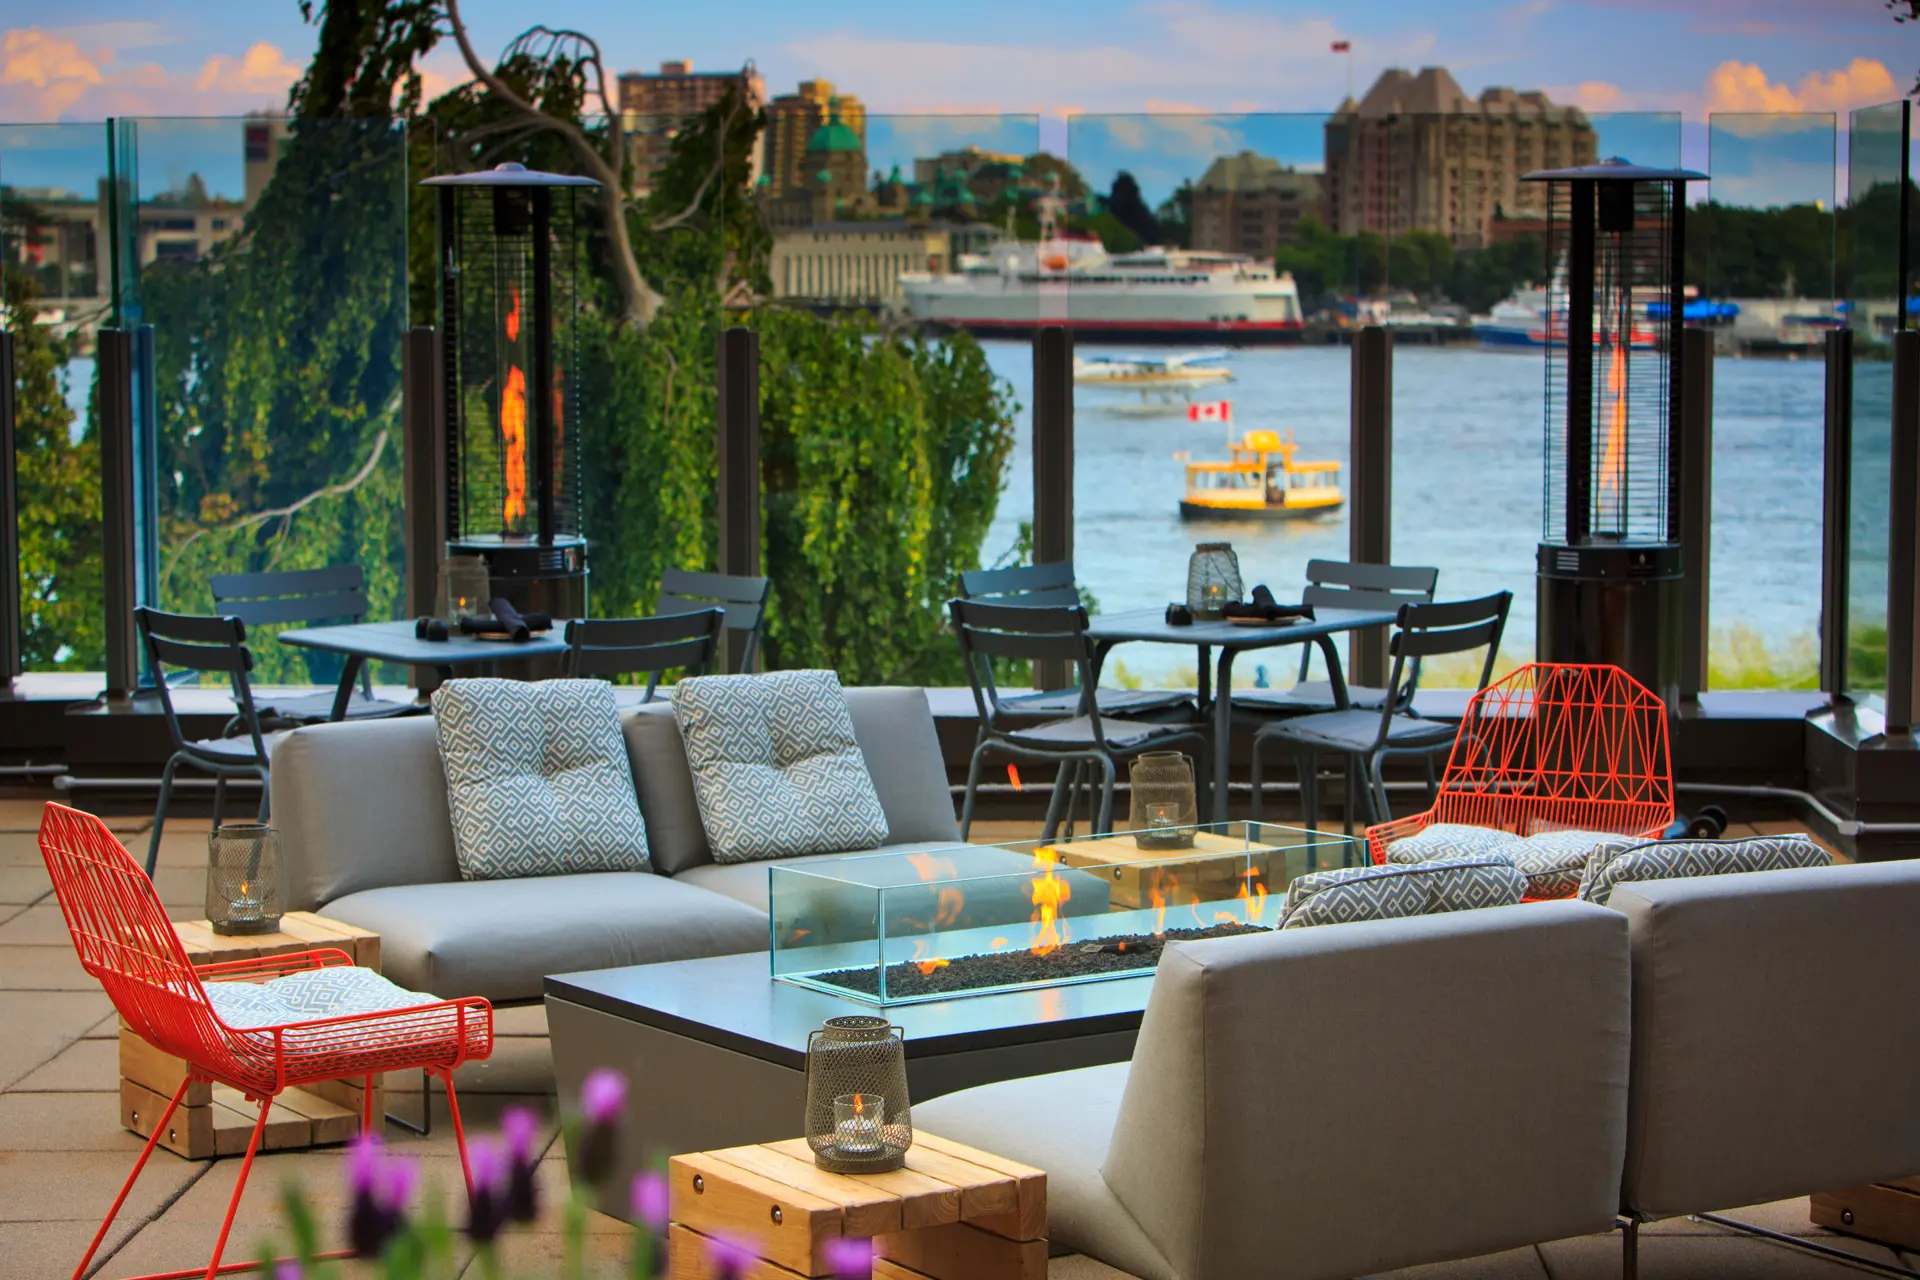 Enjoy the activity of Victoria's Inner Harbour from LURE Restaurant's Patio!